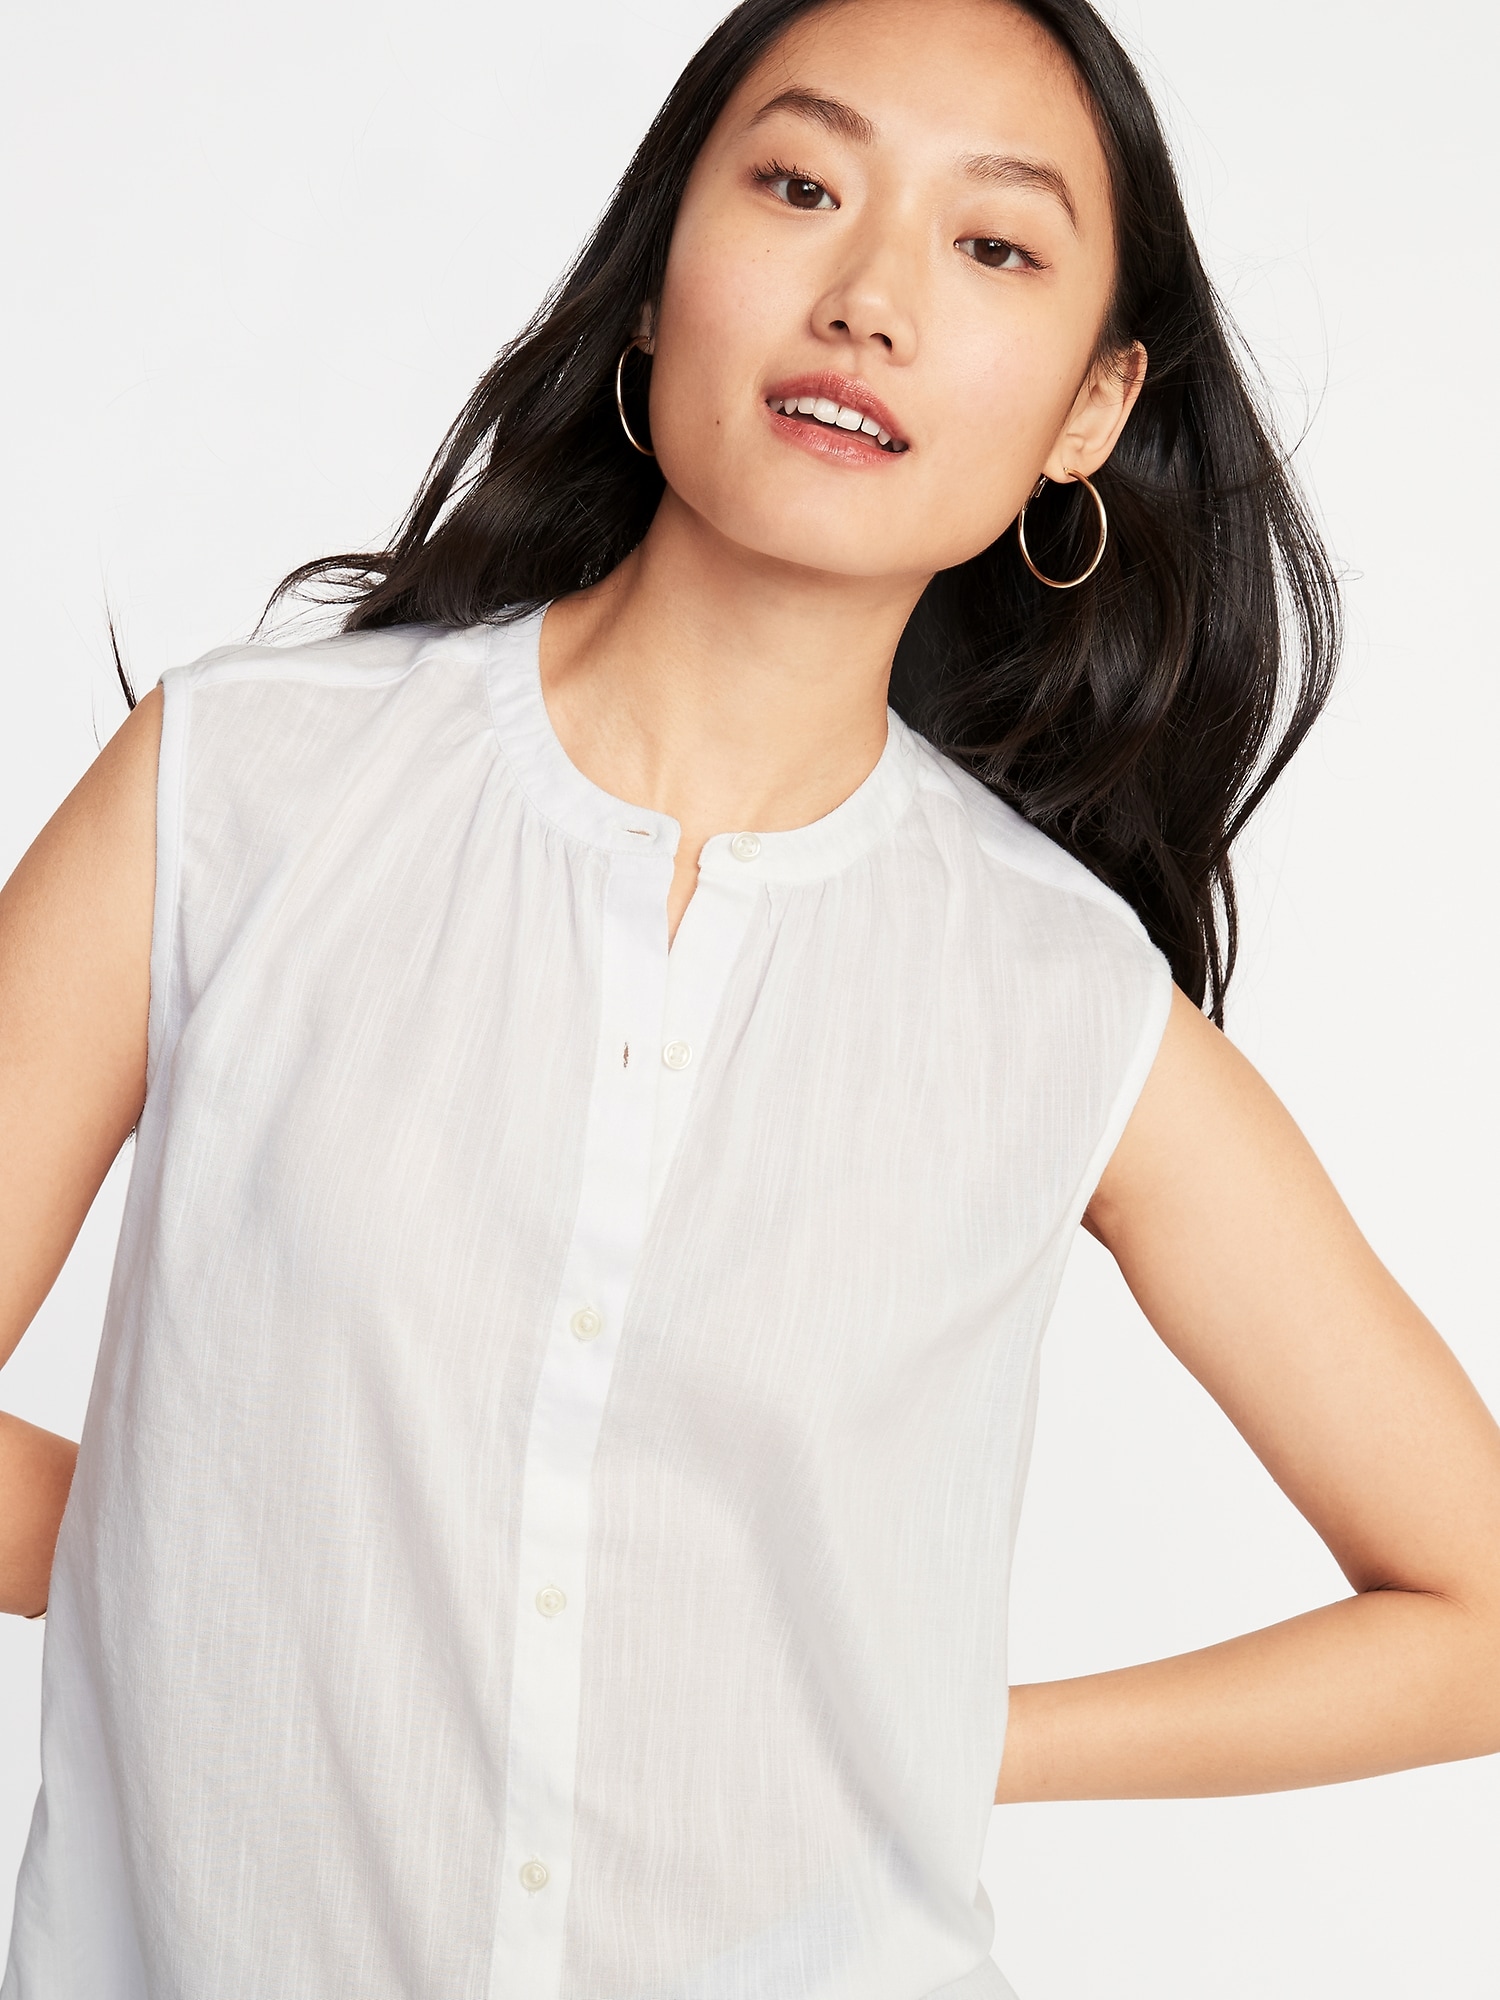 The Classic Sleeveless Button Front Shirt